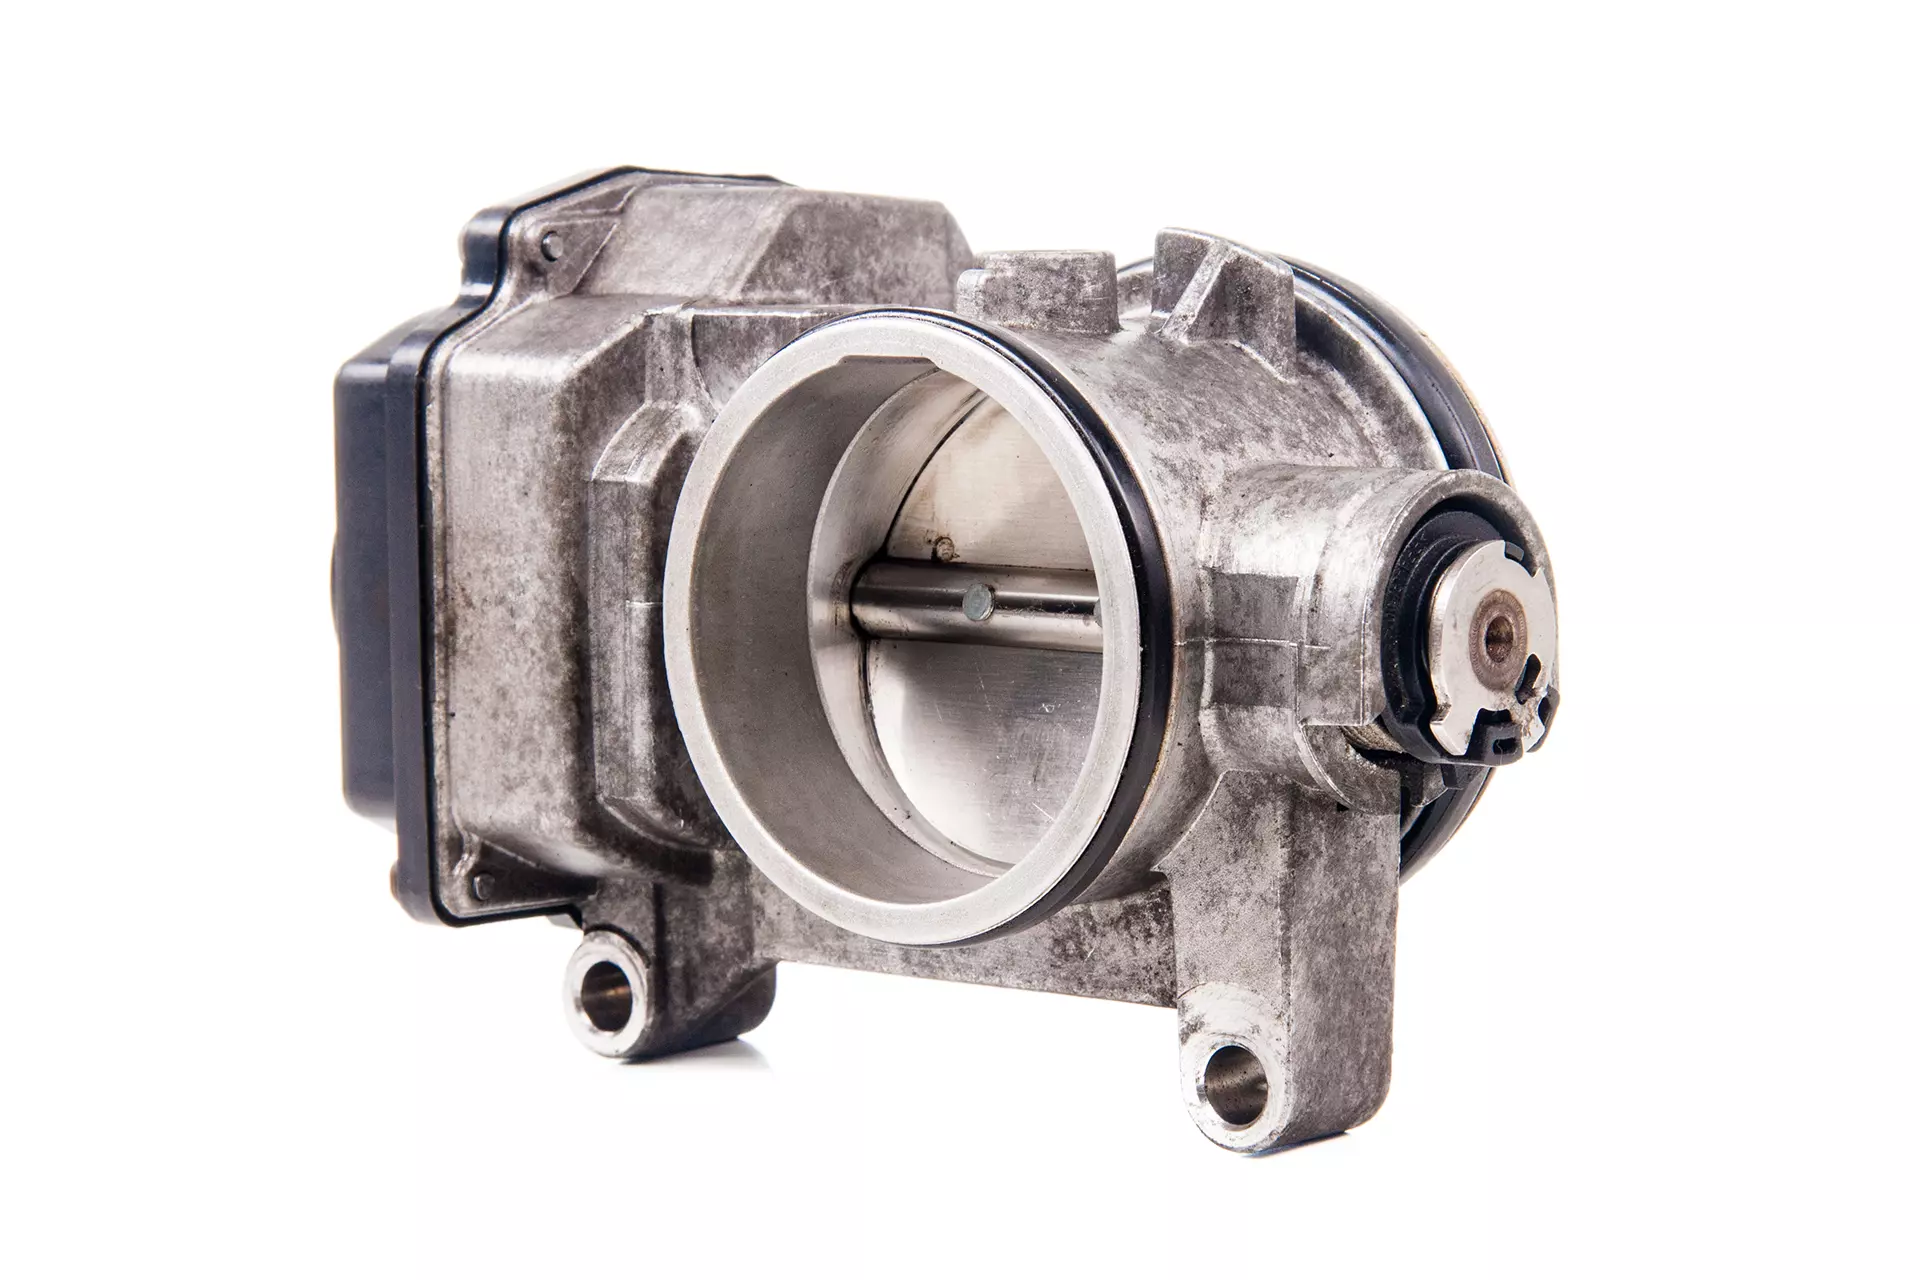 Beginner's Guide: What Is a Throttle Body and What Does It Do? - Haynes  Manuals